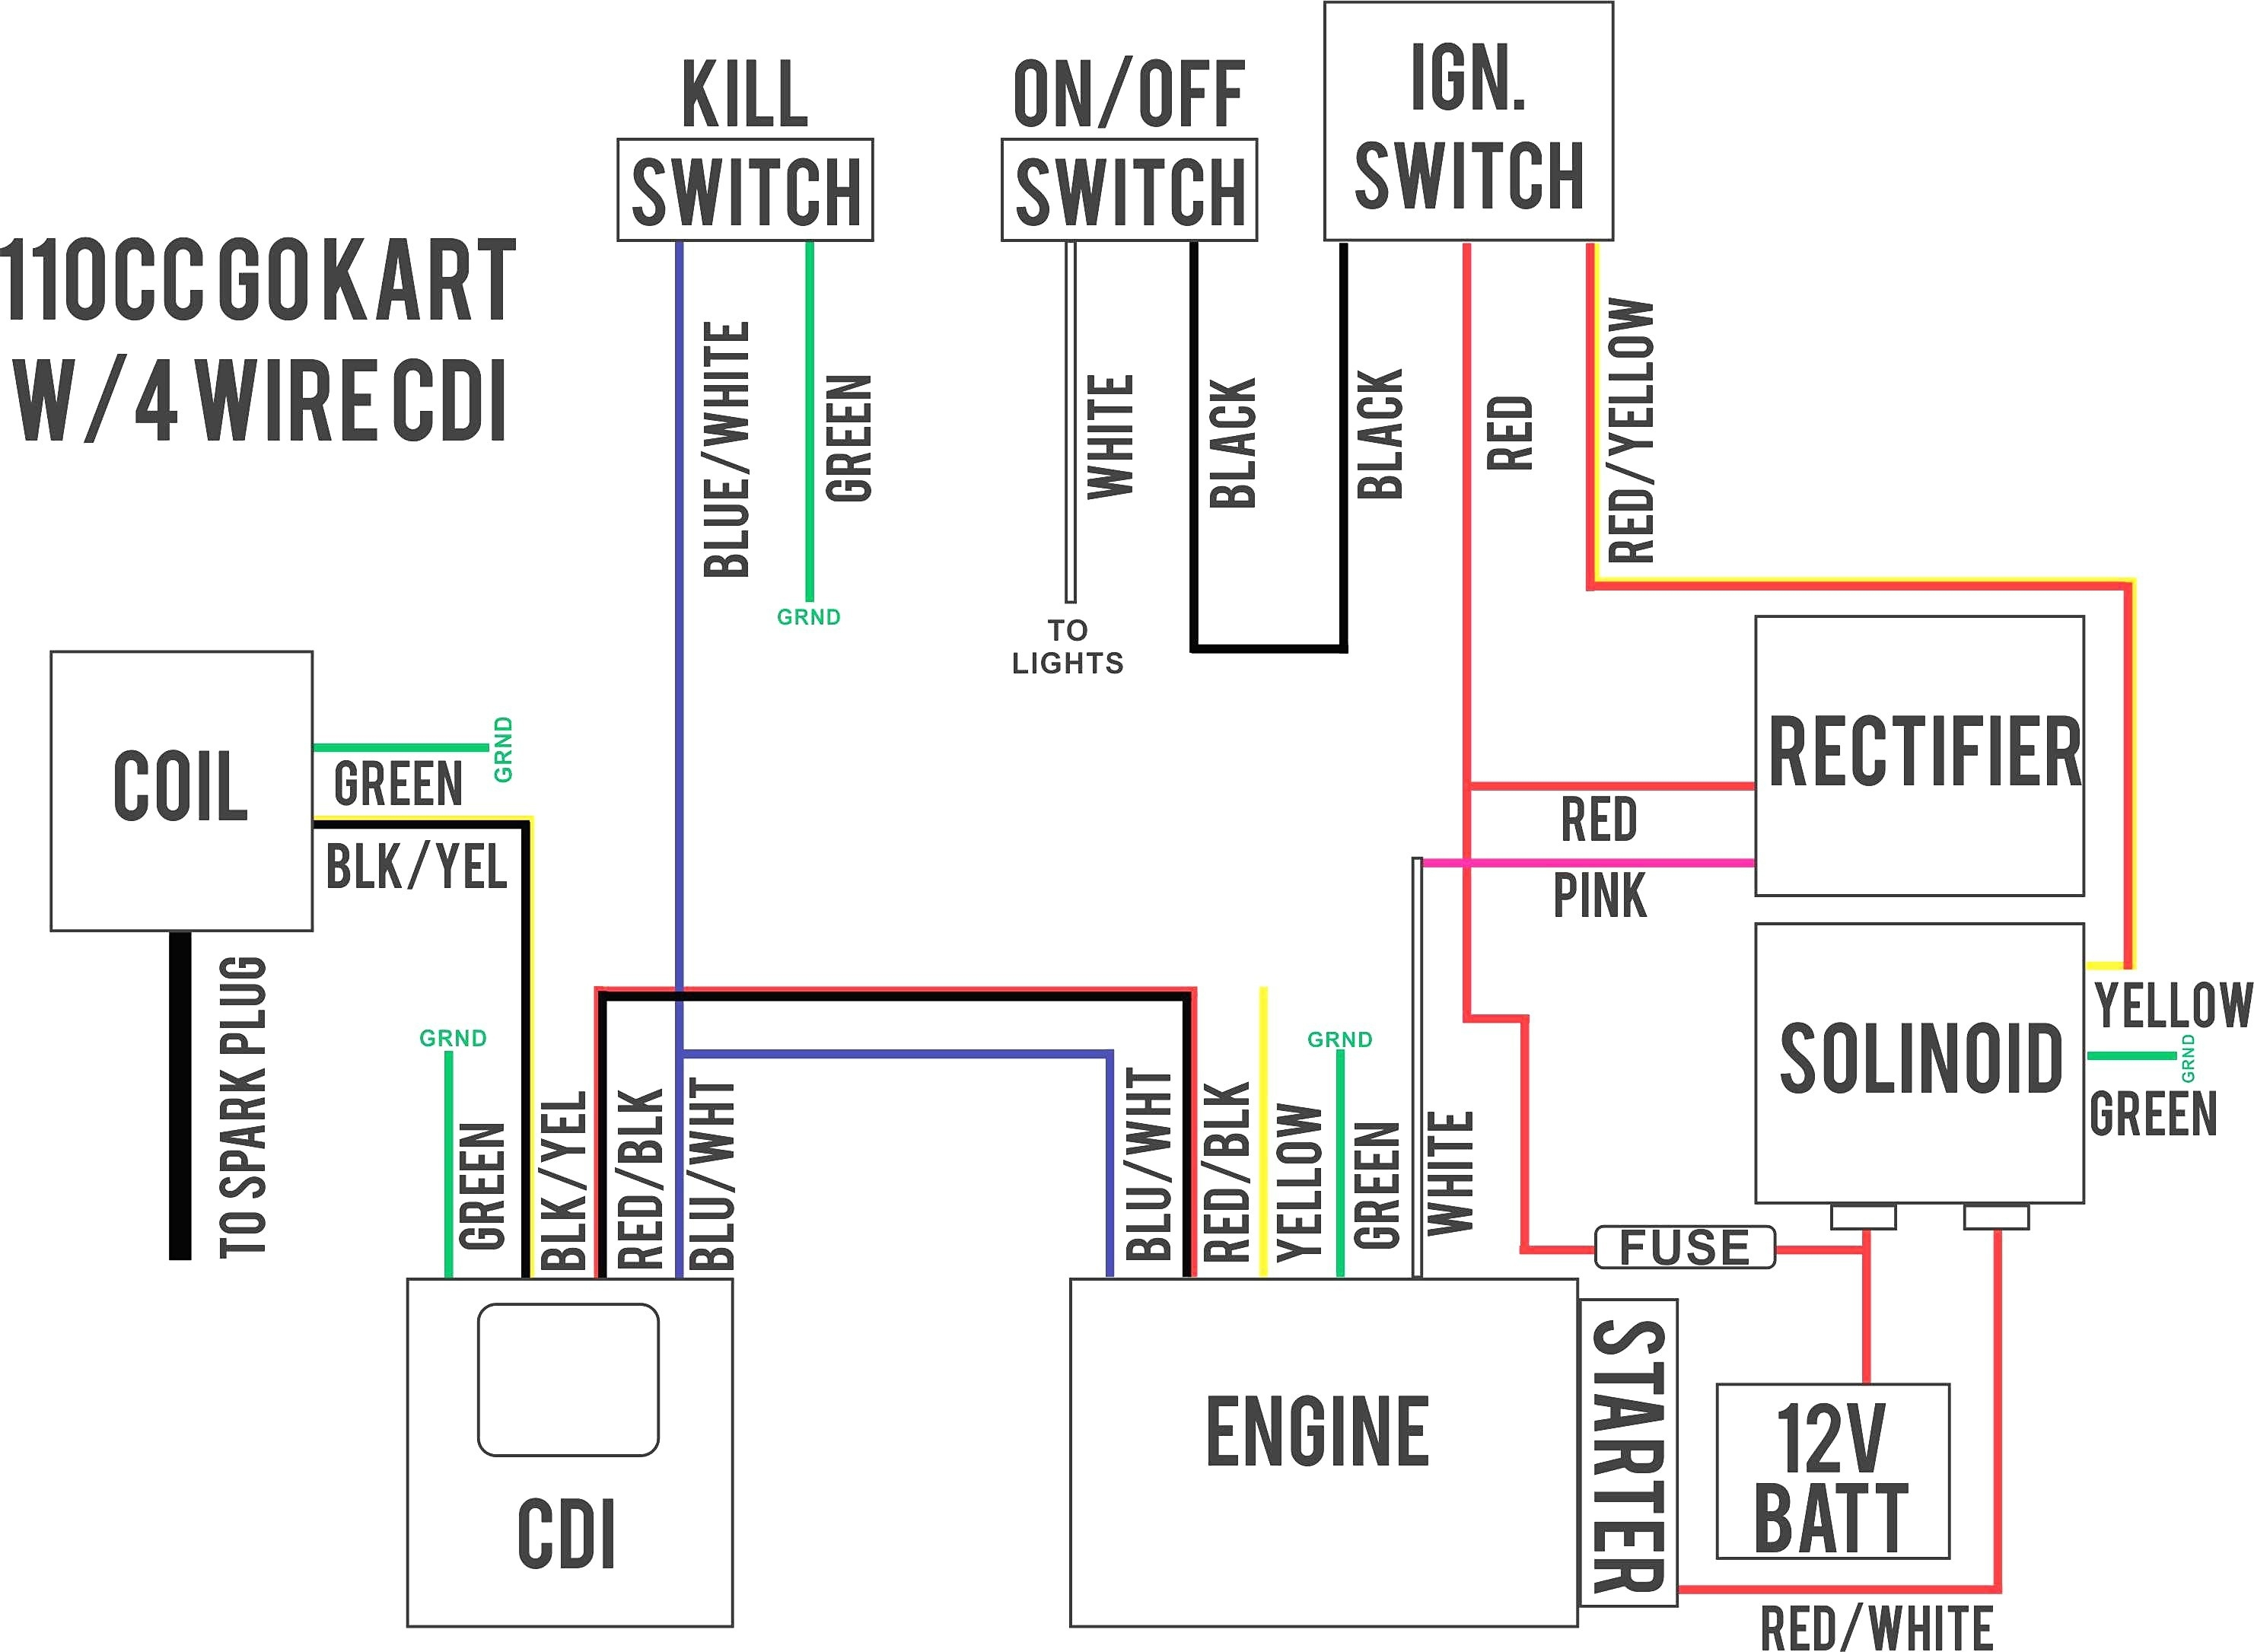 50Cc Scooter Ignition Switch Wiring Diagram | Wiring Diagram - Scooter Ignition Switch Wiring Diagram